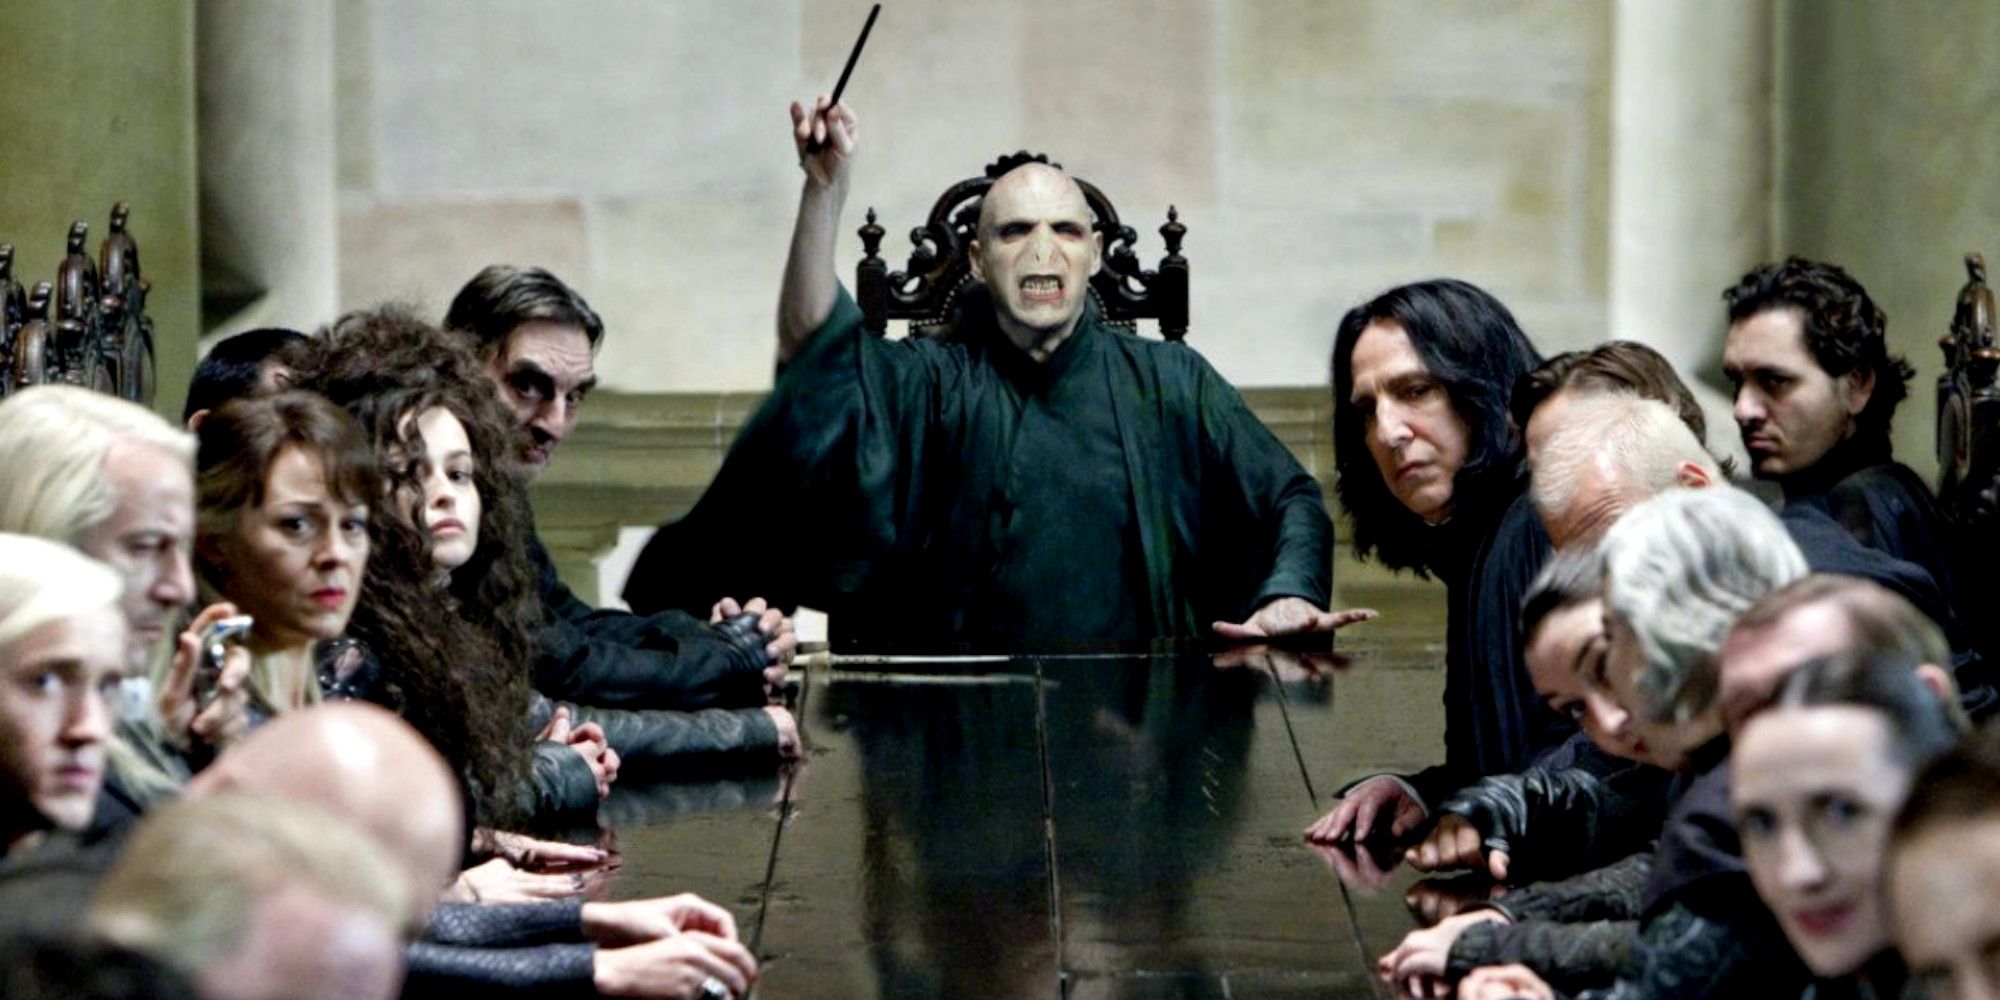 Harry Potter Most Iconic Death Eaters